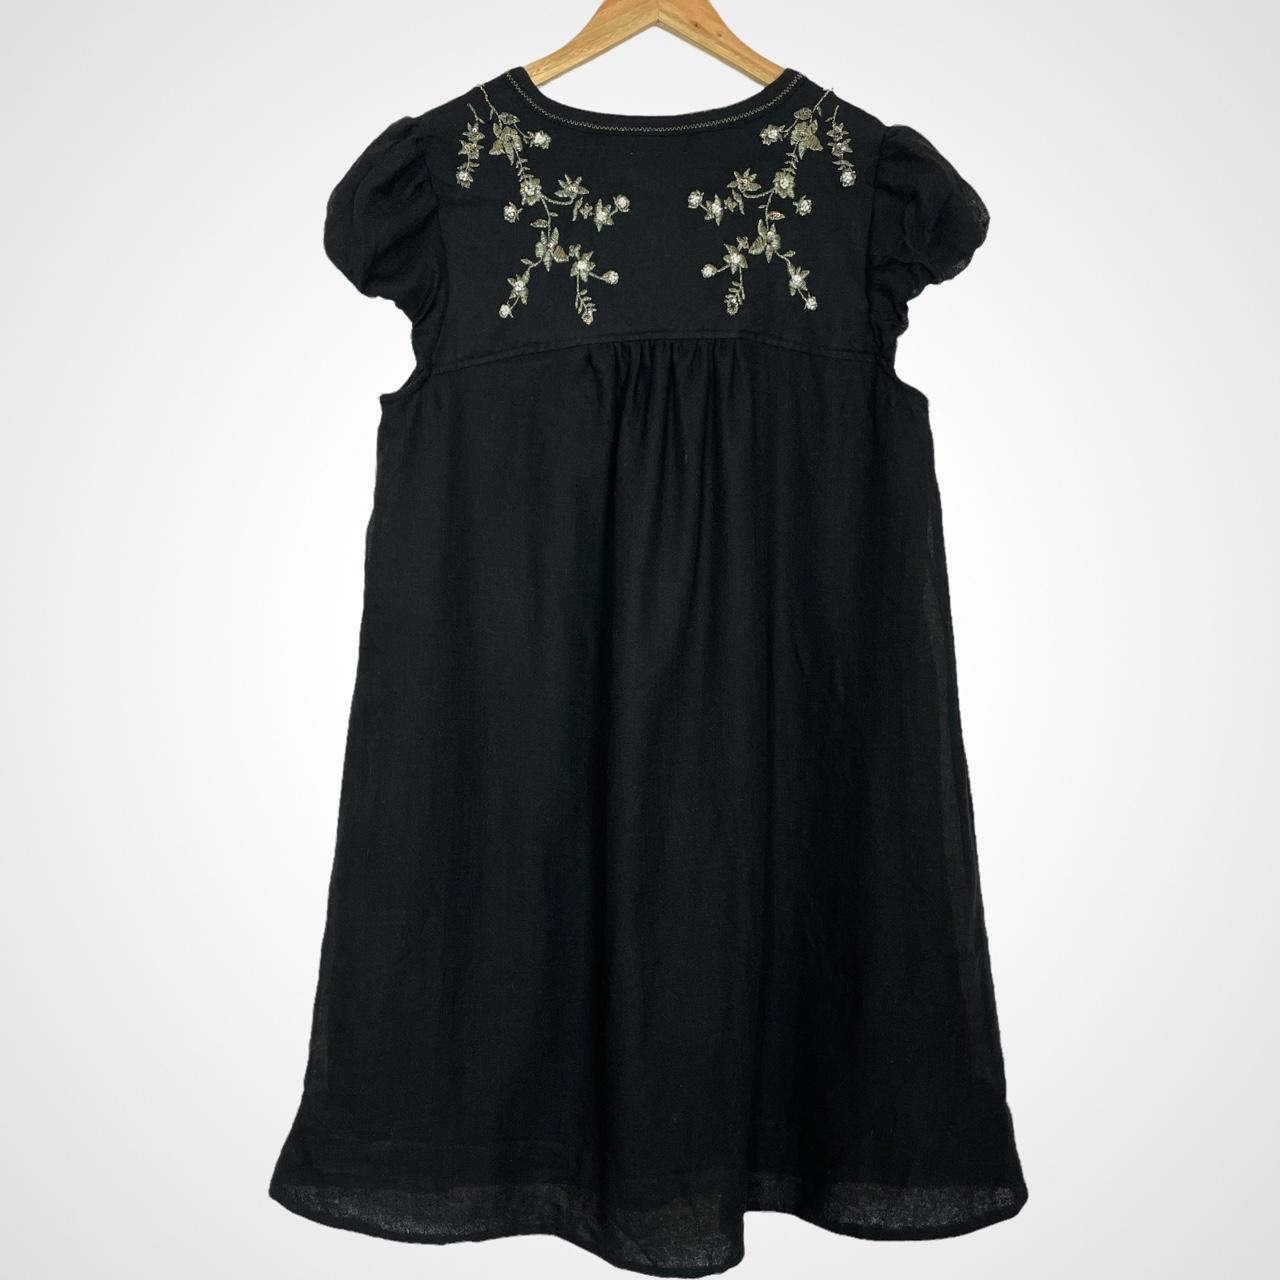 Product Image 2 - Meadow Rue Embroidered Dress Beads